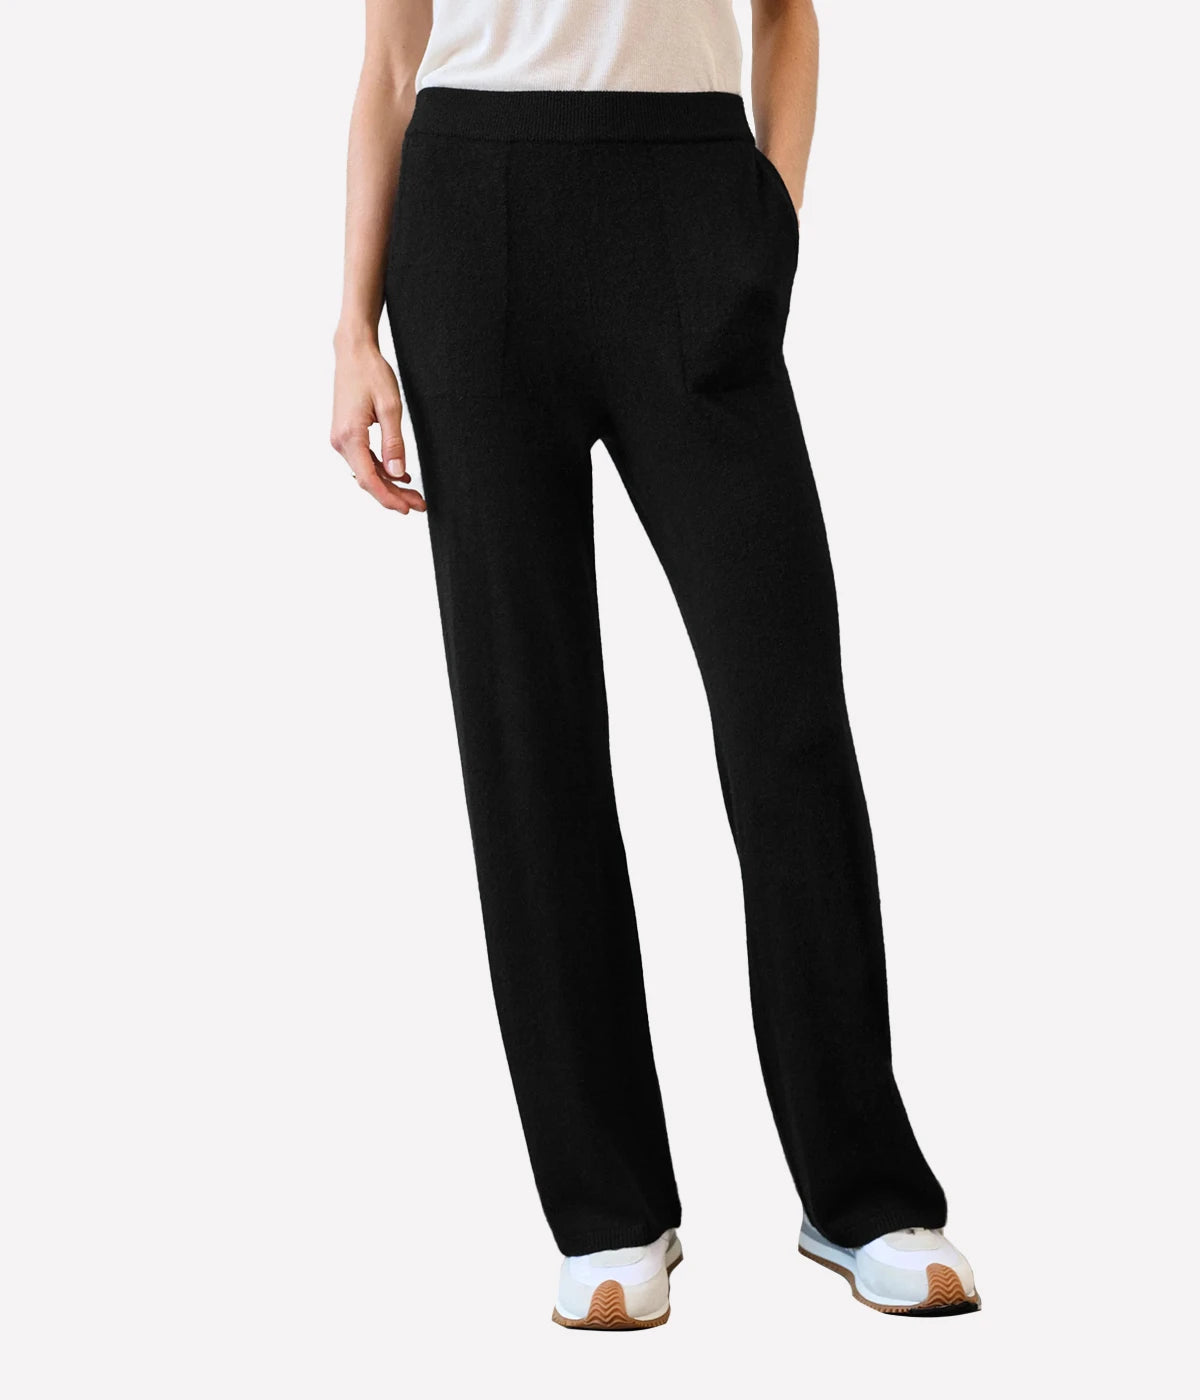 Cashmere Wide Leg Pant in Black